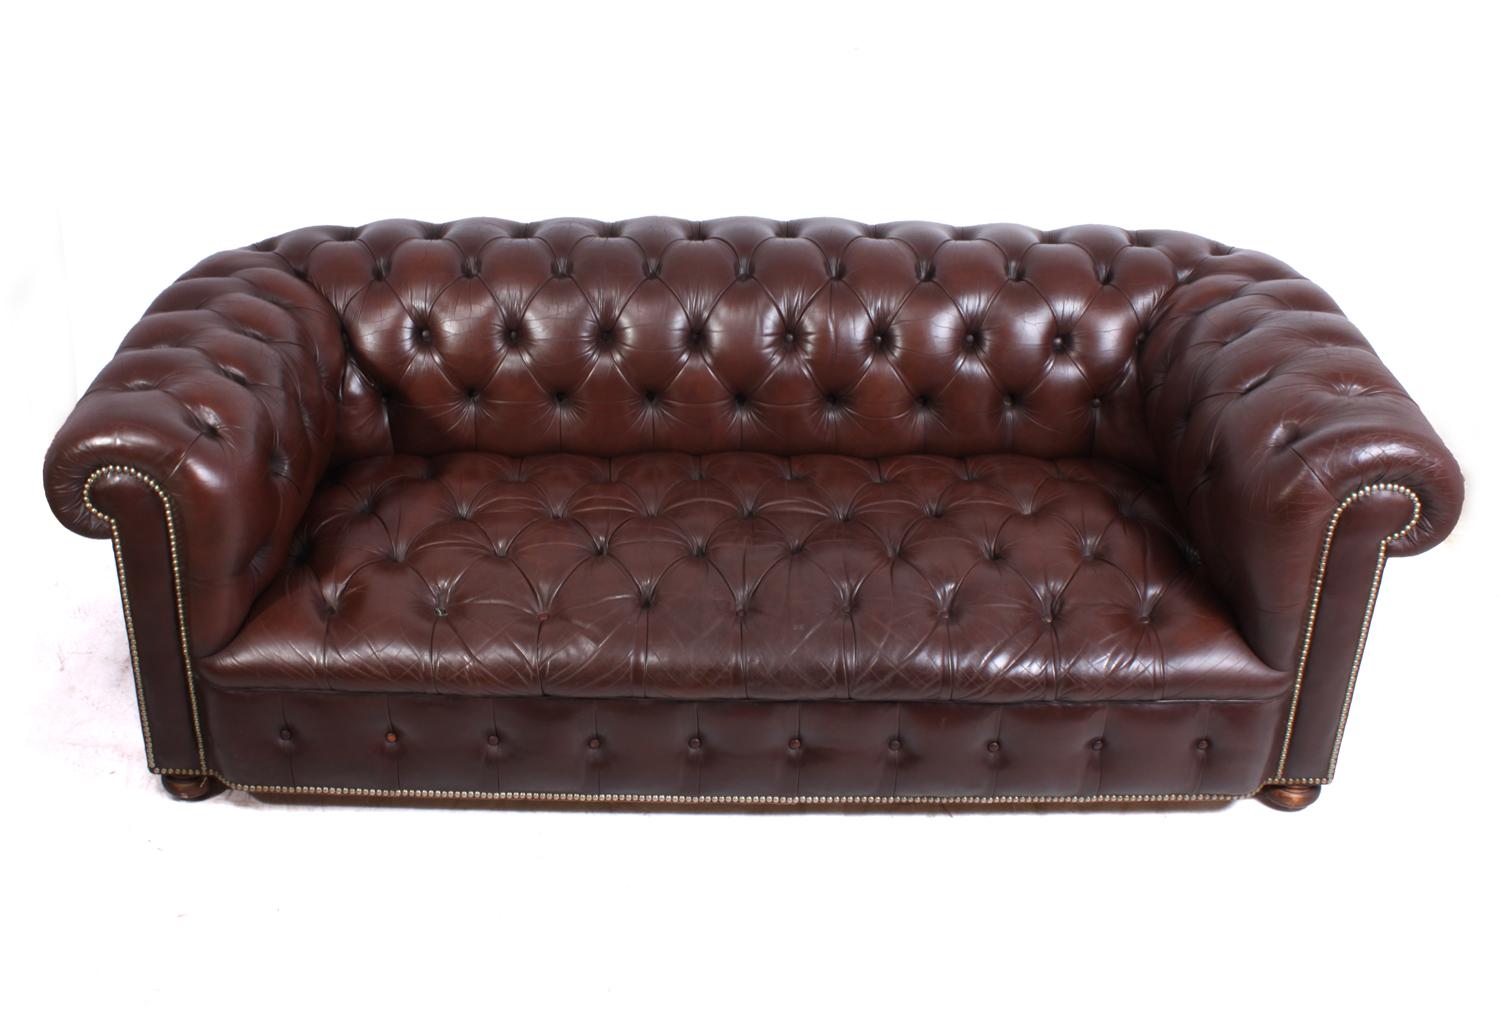 Vintage leather Chesterfield
A good quality brown deep buttoned leather chesterfield sofa, solid hardwood frame coil sprung seat arms and back, bun feet at the front and legs at the back, all buttons present, no rips or tears in the leather

Age